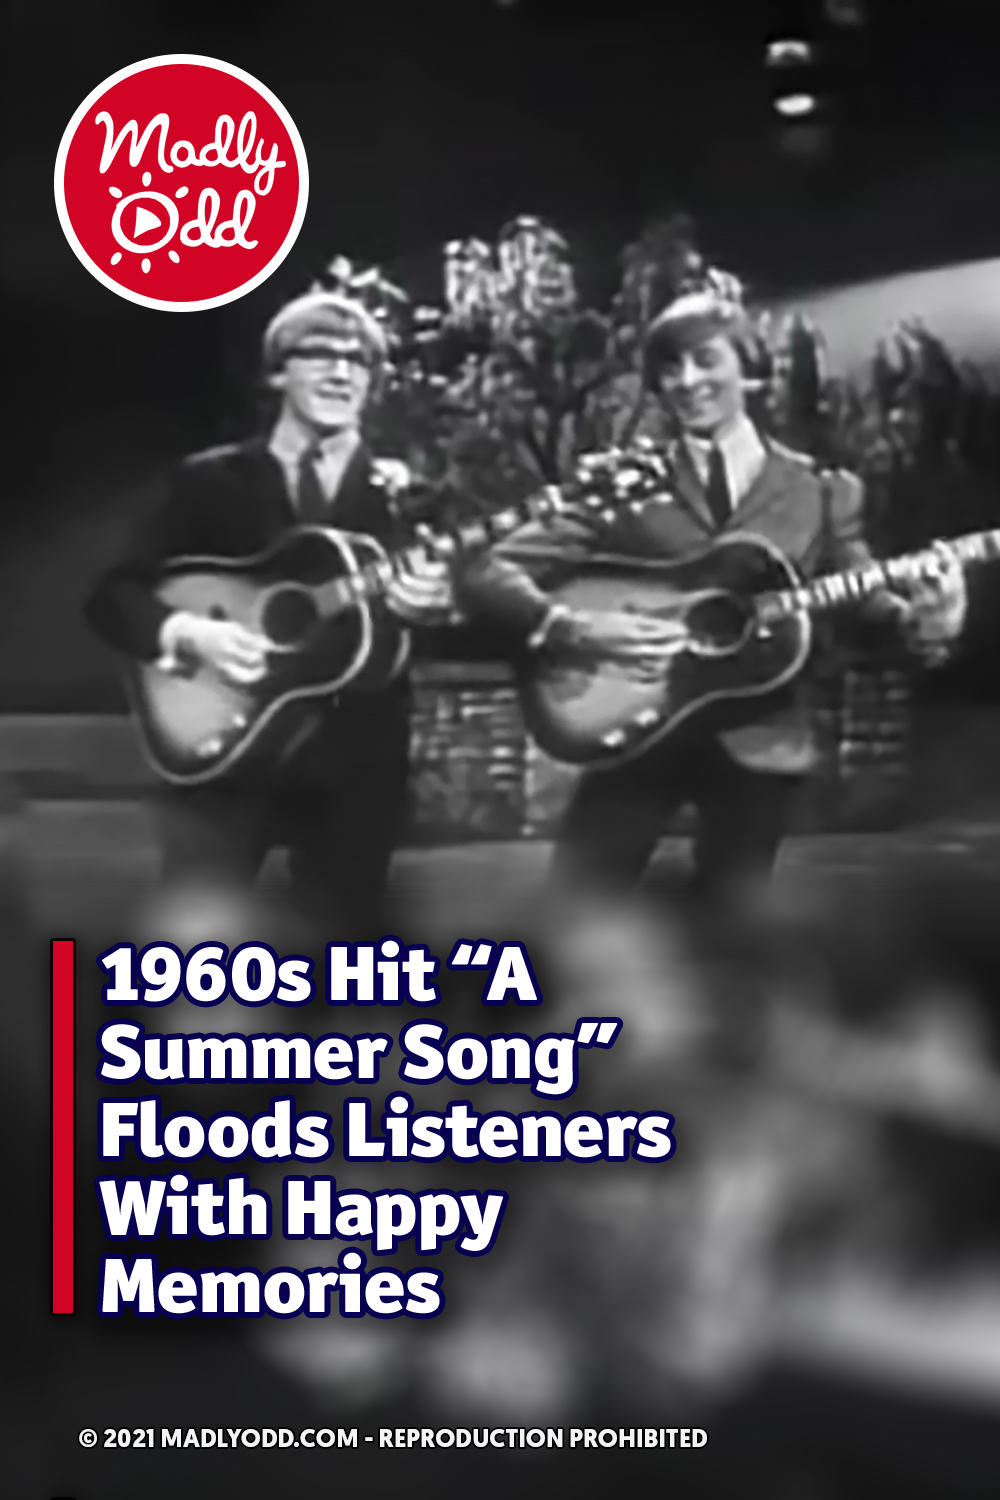 1960s Hit “A Summer Song” Floods Listeners With Happy Memories